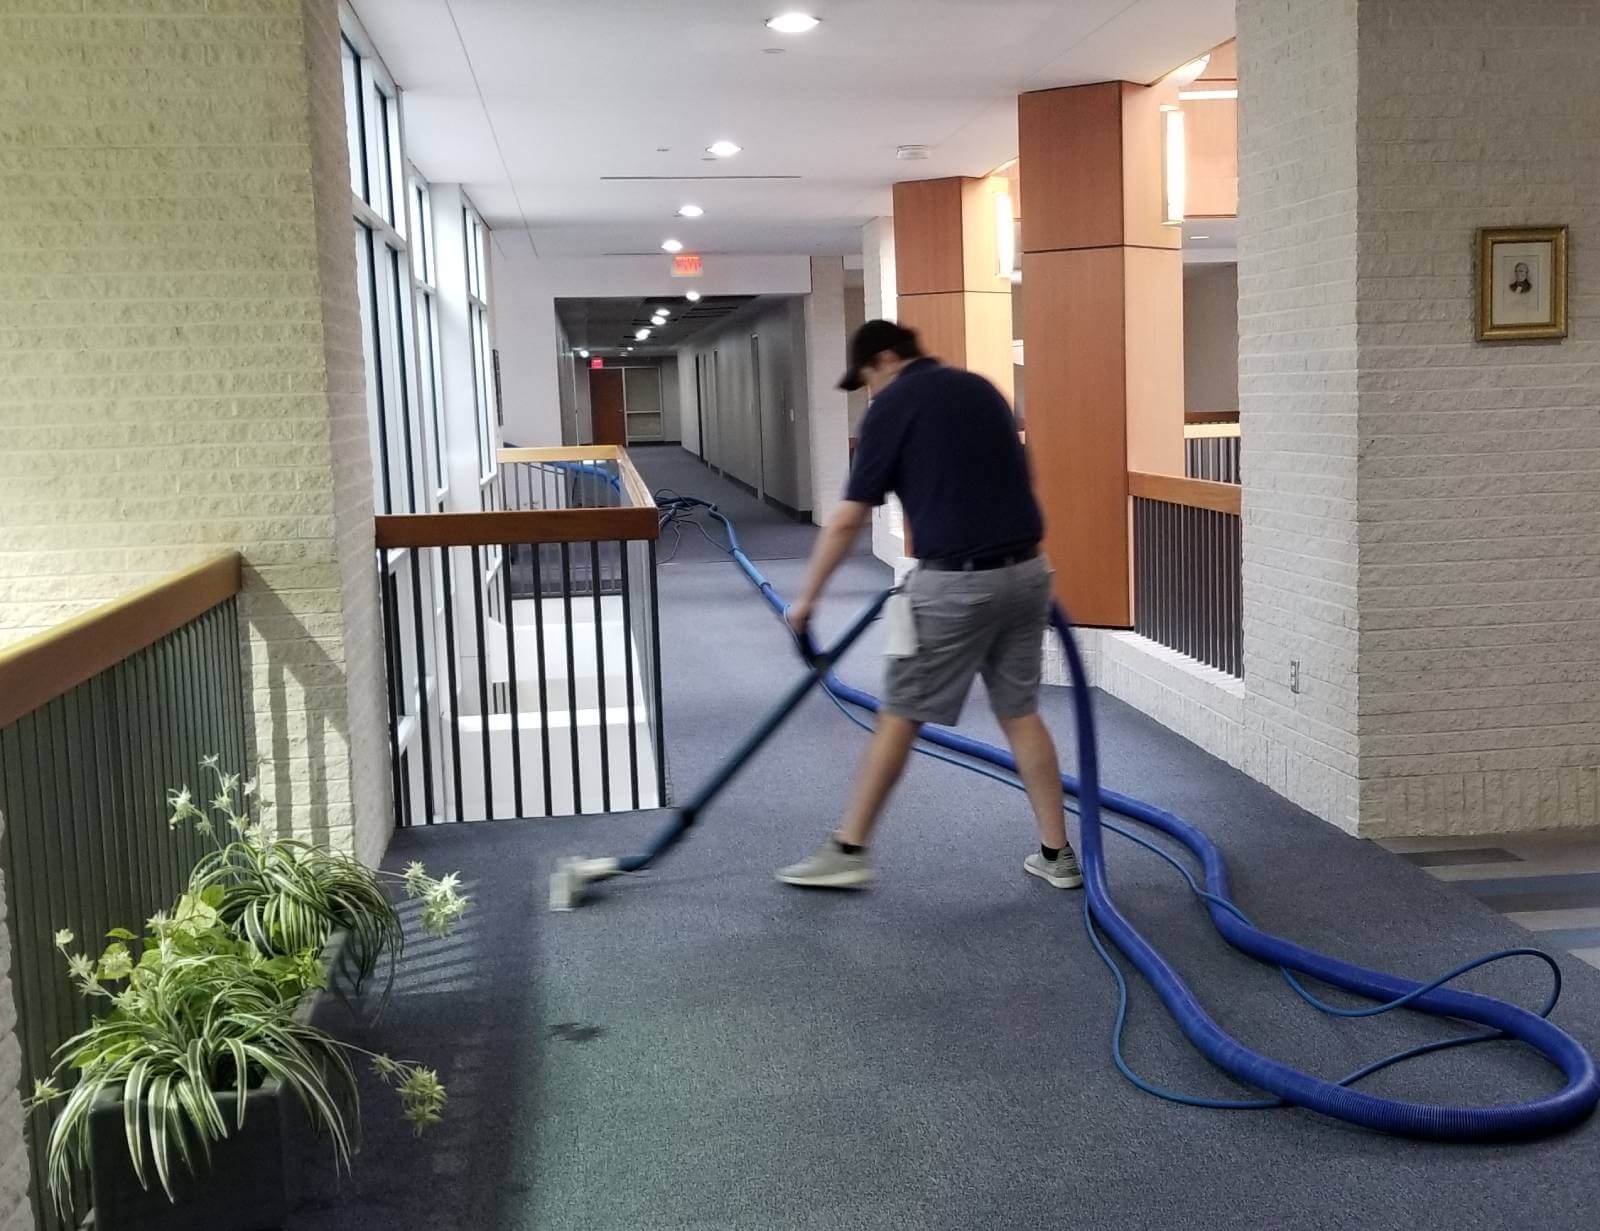 Mighty Clean professional cleaning carpeted area in commercial hallway